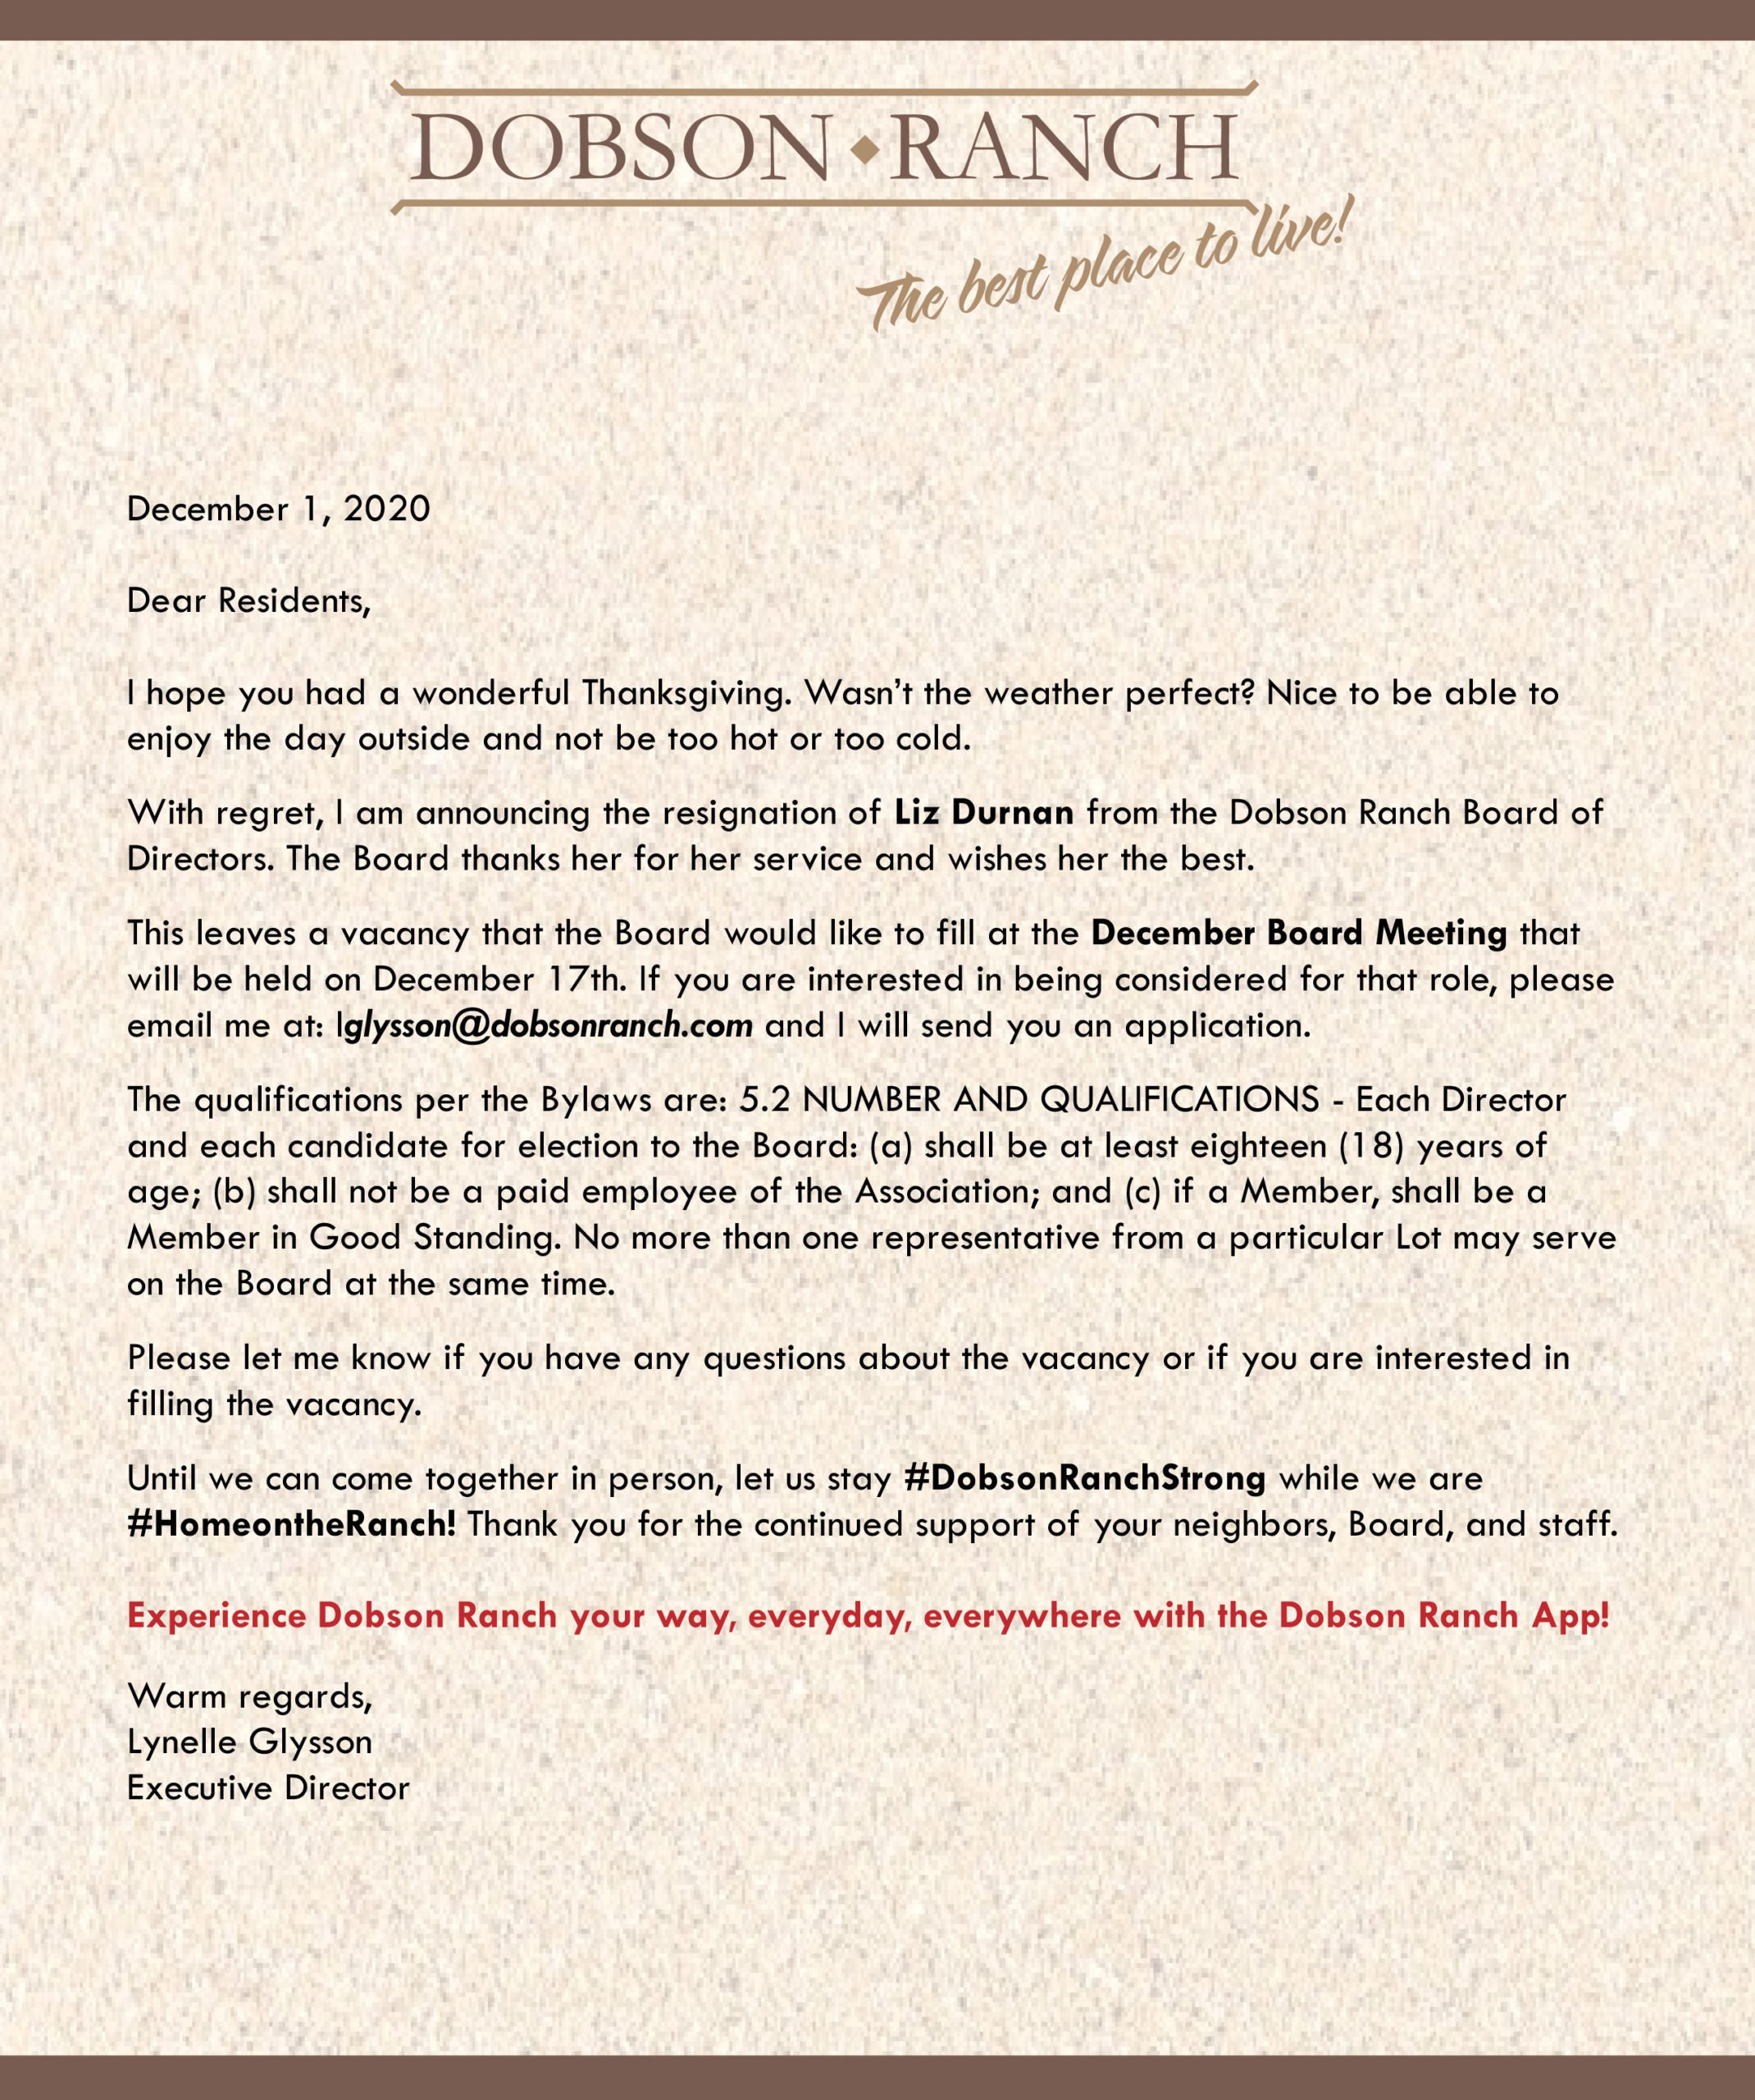 Letter to Our Residents – December 1, 2020